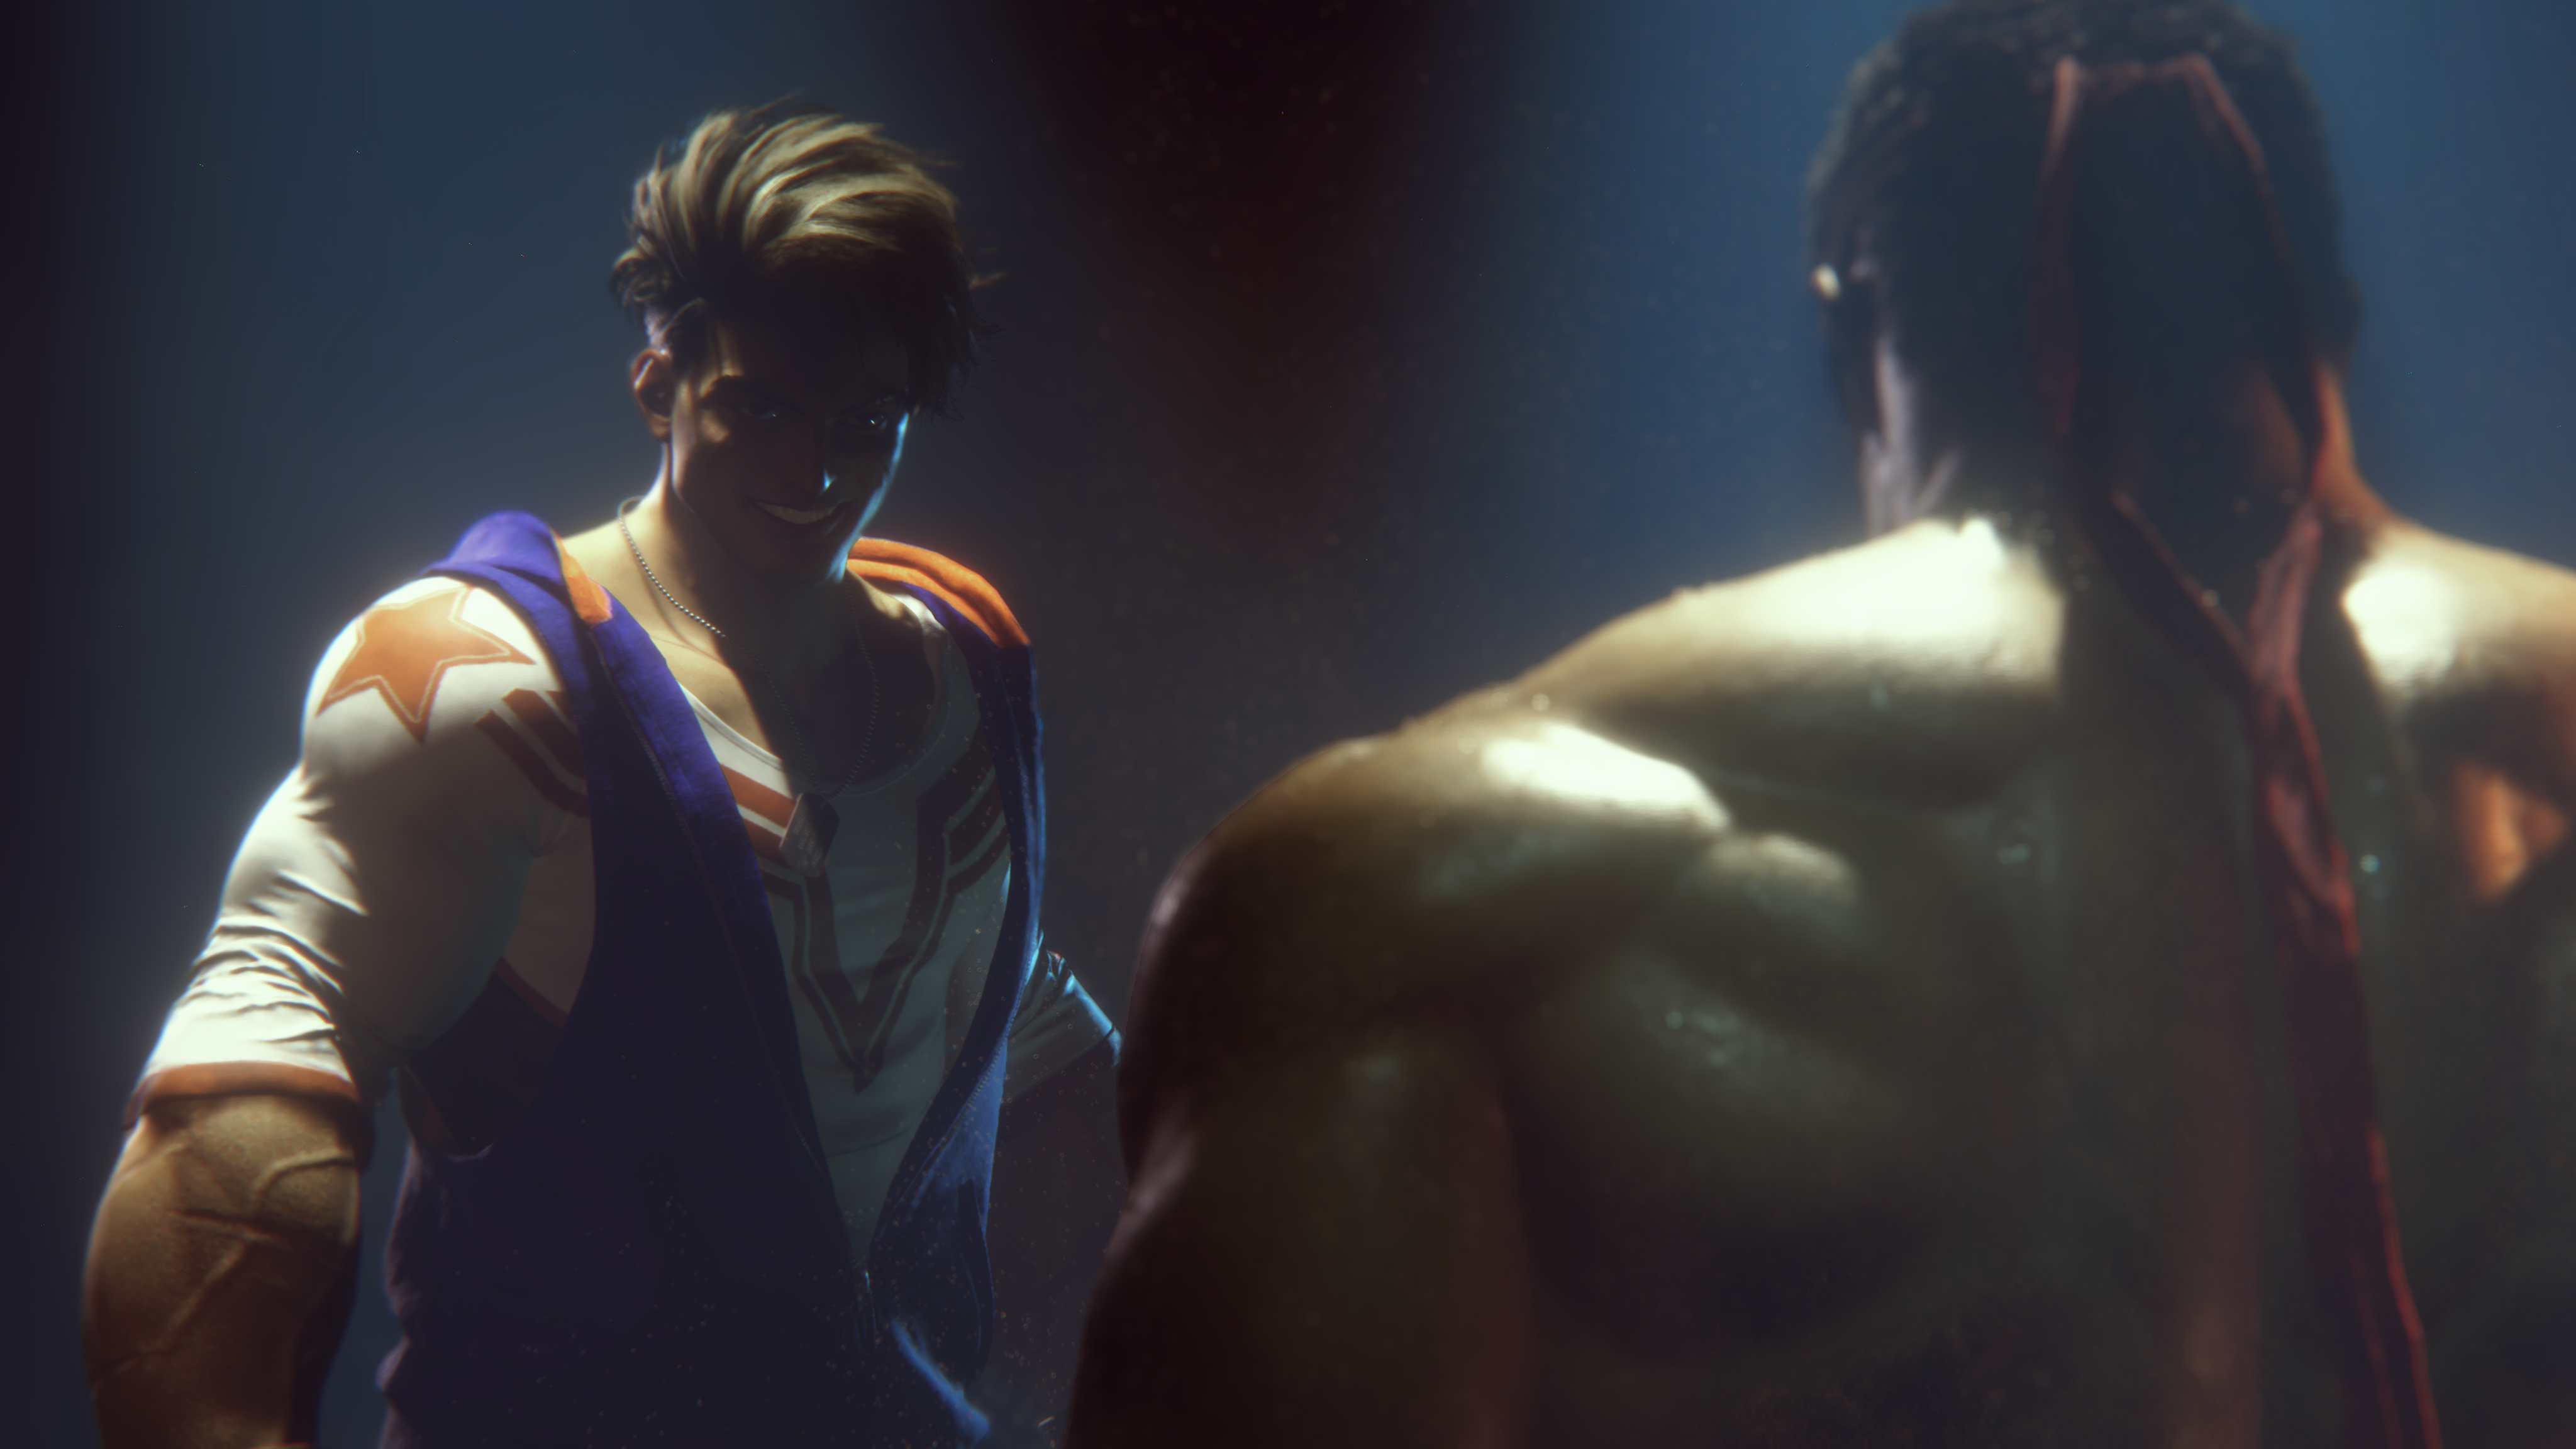 Ryu Character Images, Game Design Docs, Street Fighter 6, Museum